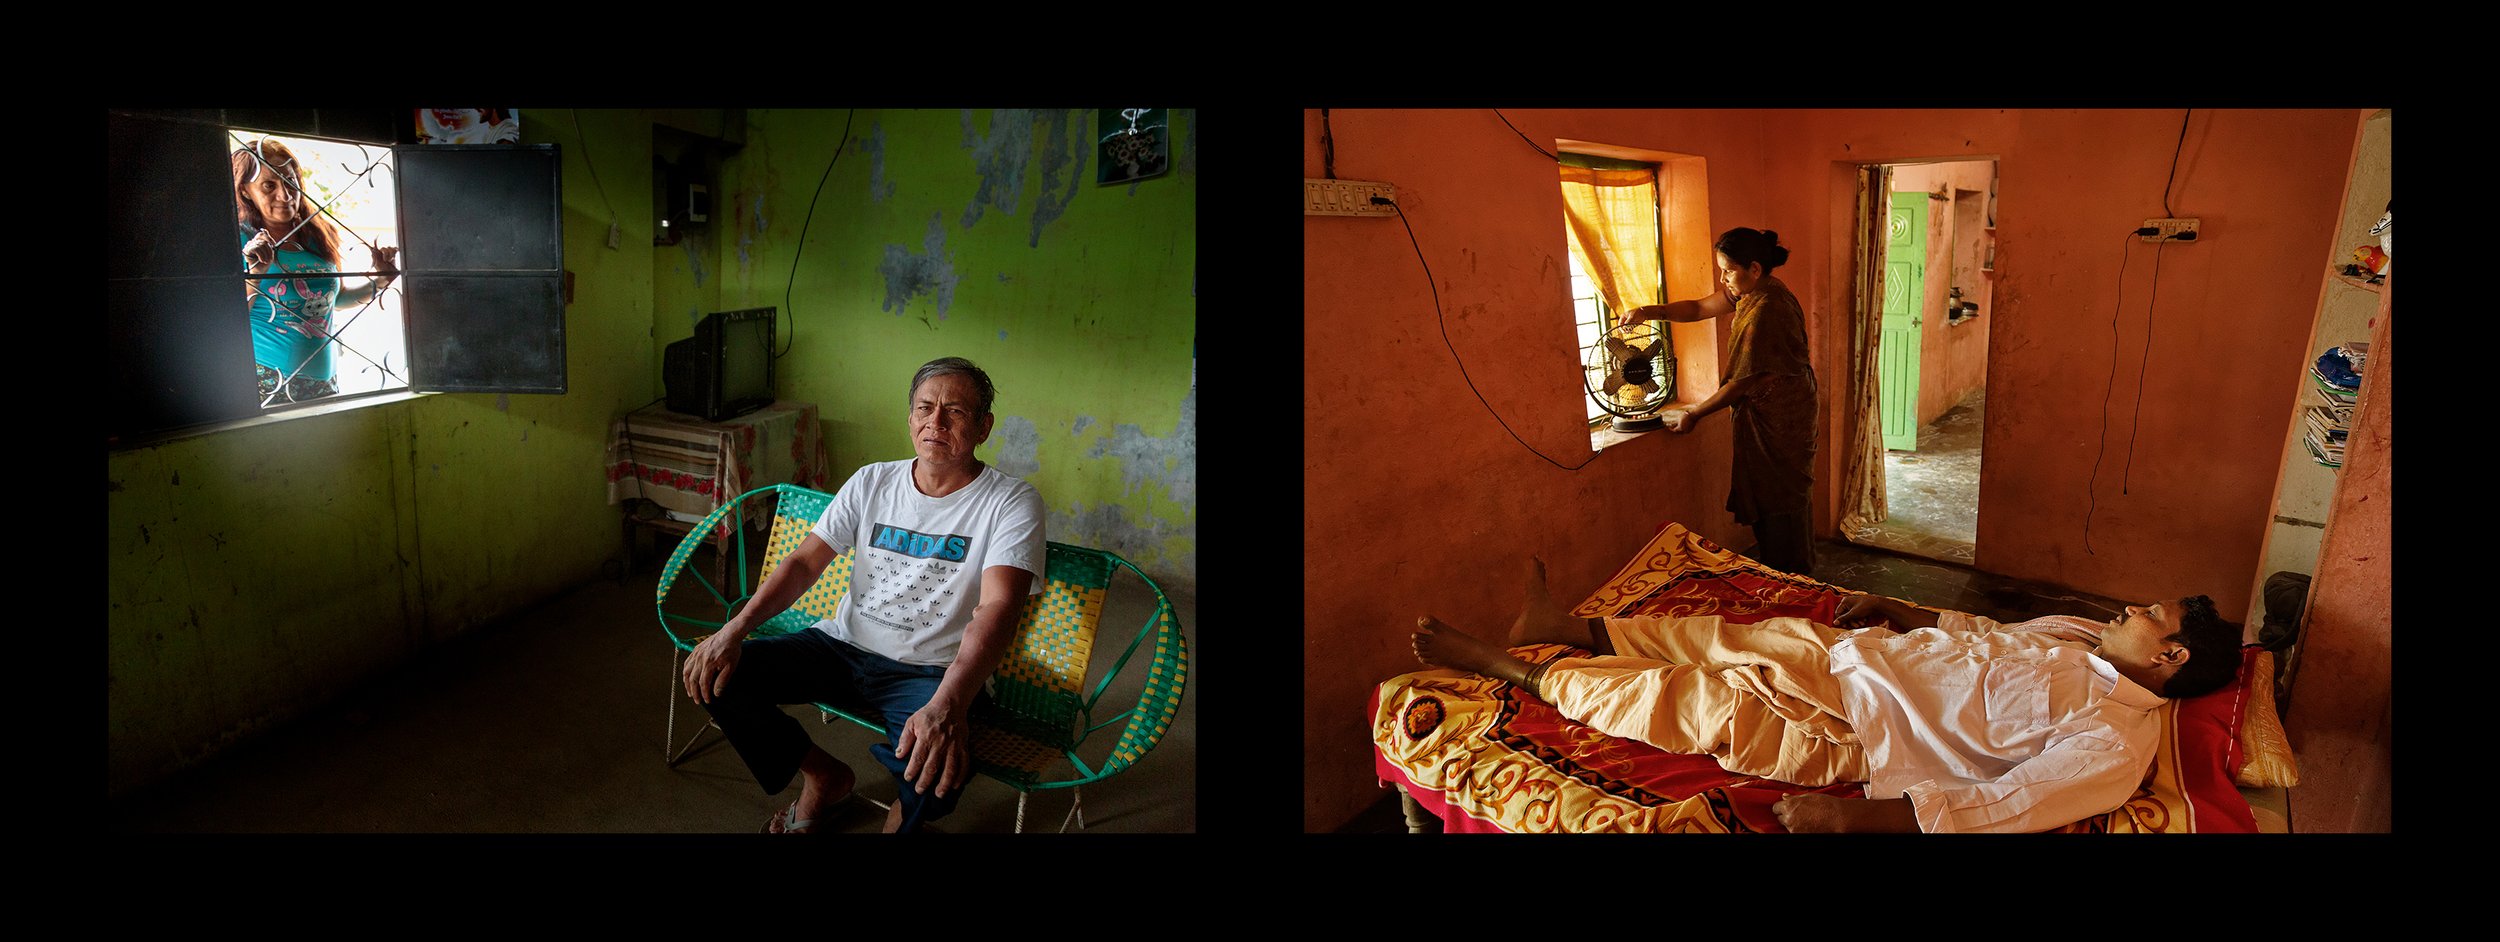  (left) Don Raphael Diaz, 53, at home in Sullana, Peru on Feb. 15, 2018. He has spent 3 days a week on dialysis for the past 5 years.   (right) Ventkataiah, a CKDnT patient, rests at home in the village of Kota, outside of Nellore, India on Jan. 13, 